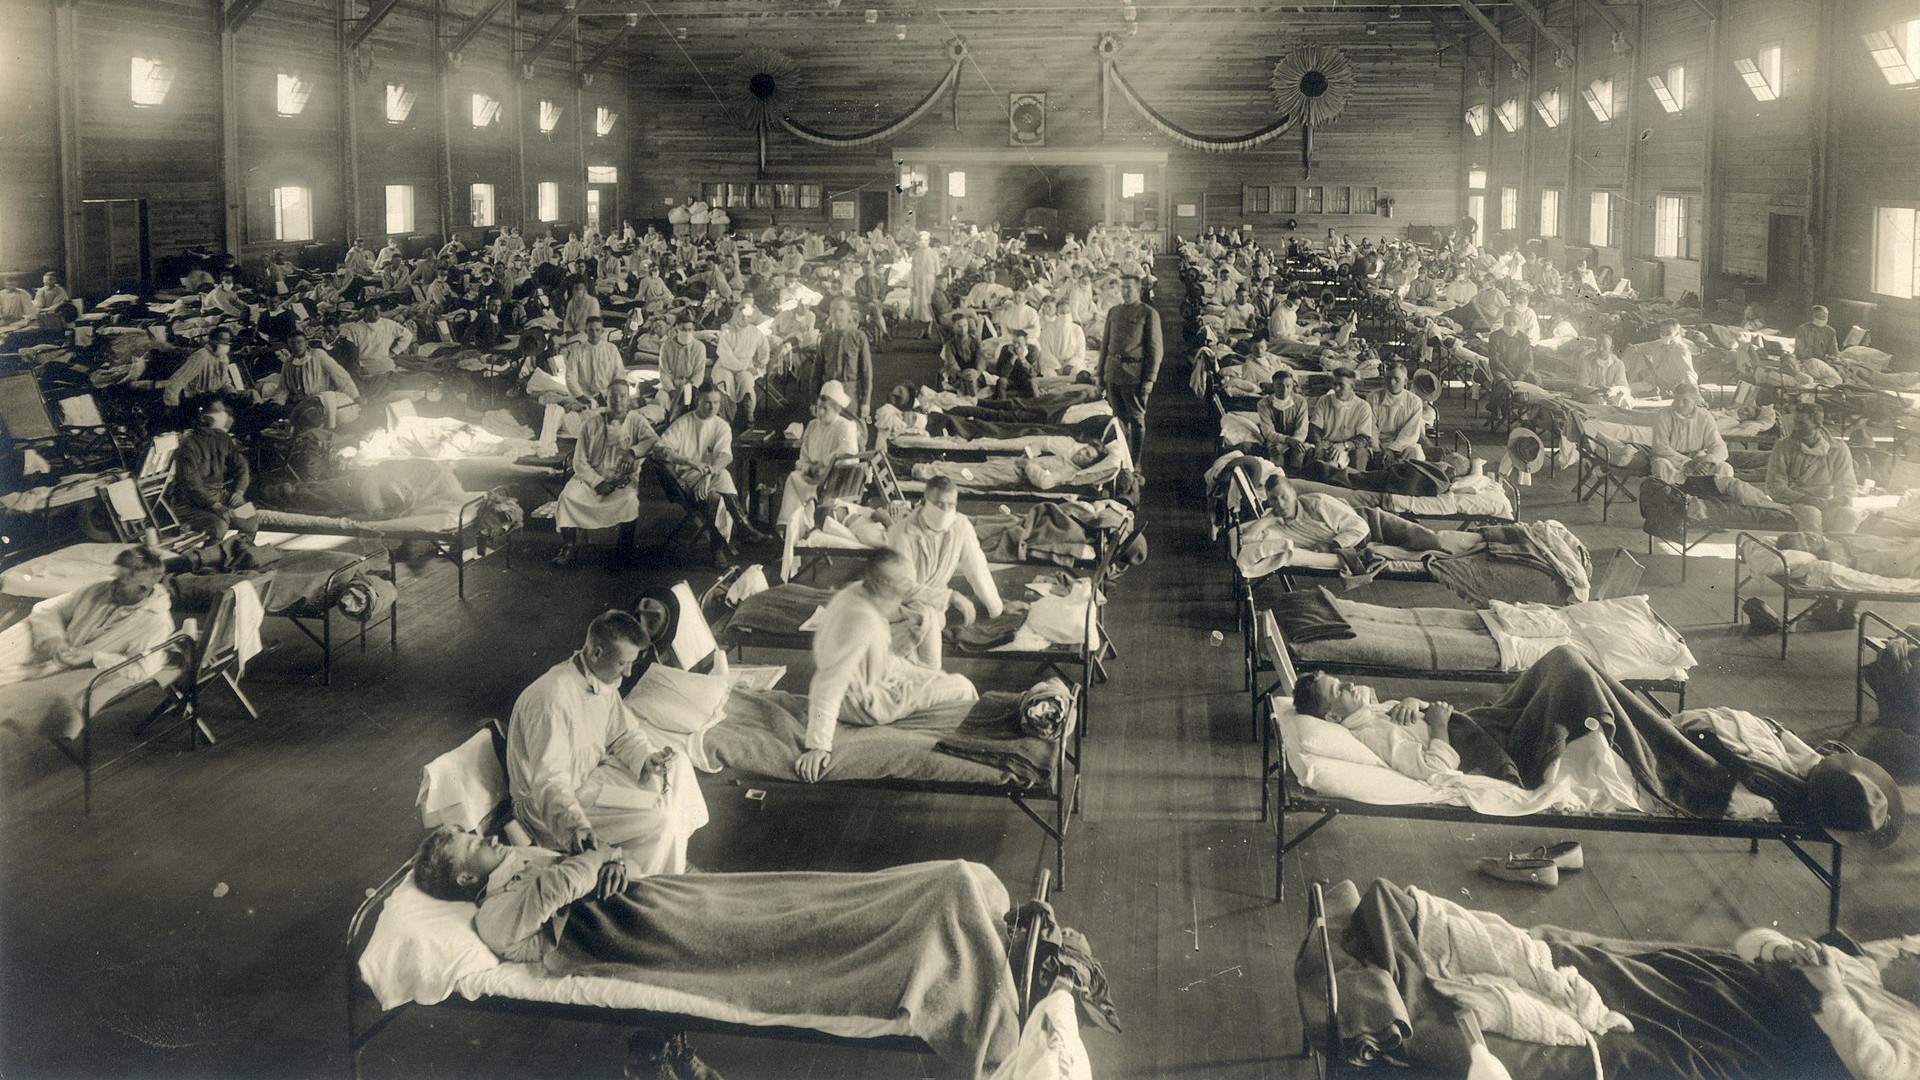 During the 1918 flu pandemic, a group of individuals lay together on beds in a vast room, seeking solace and care.